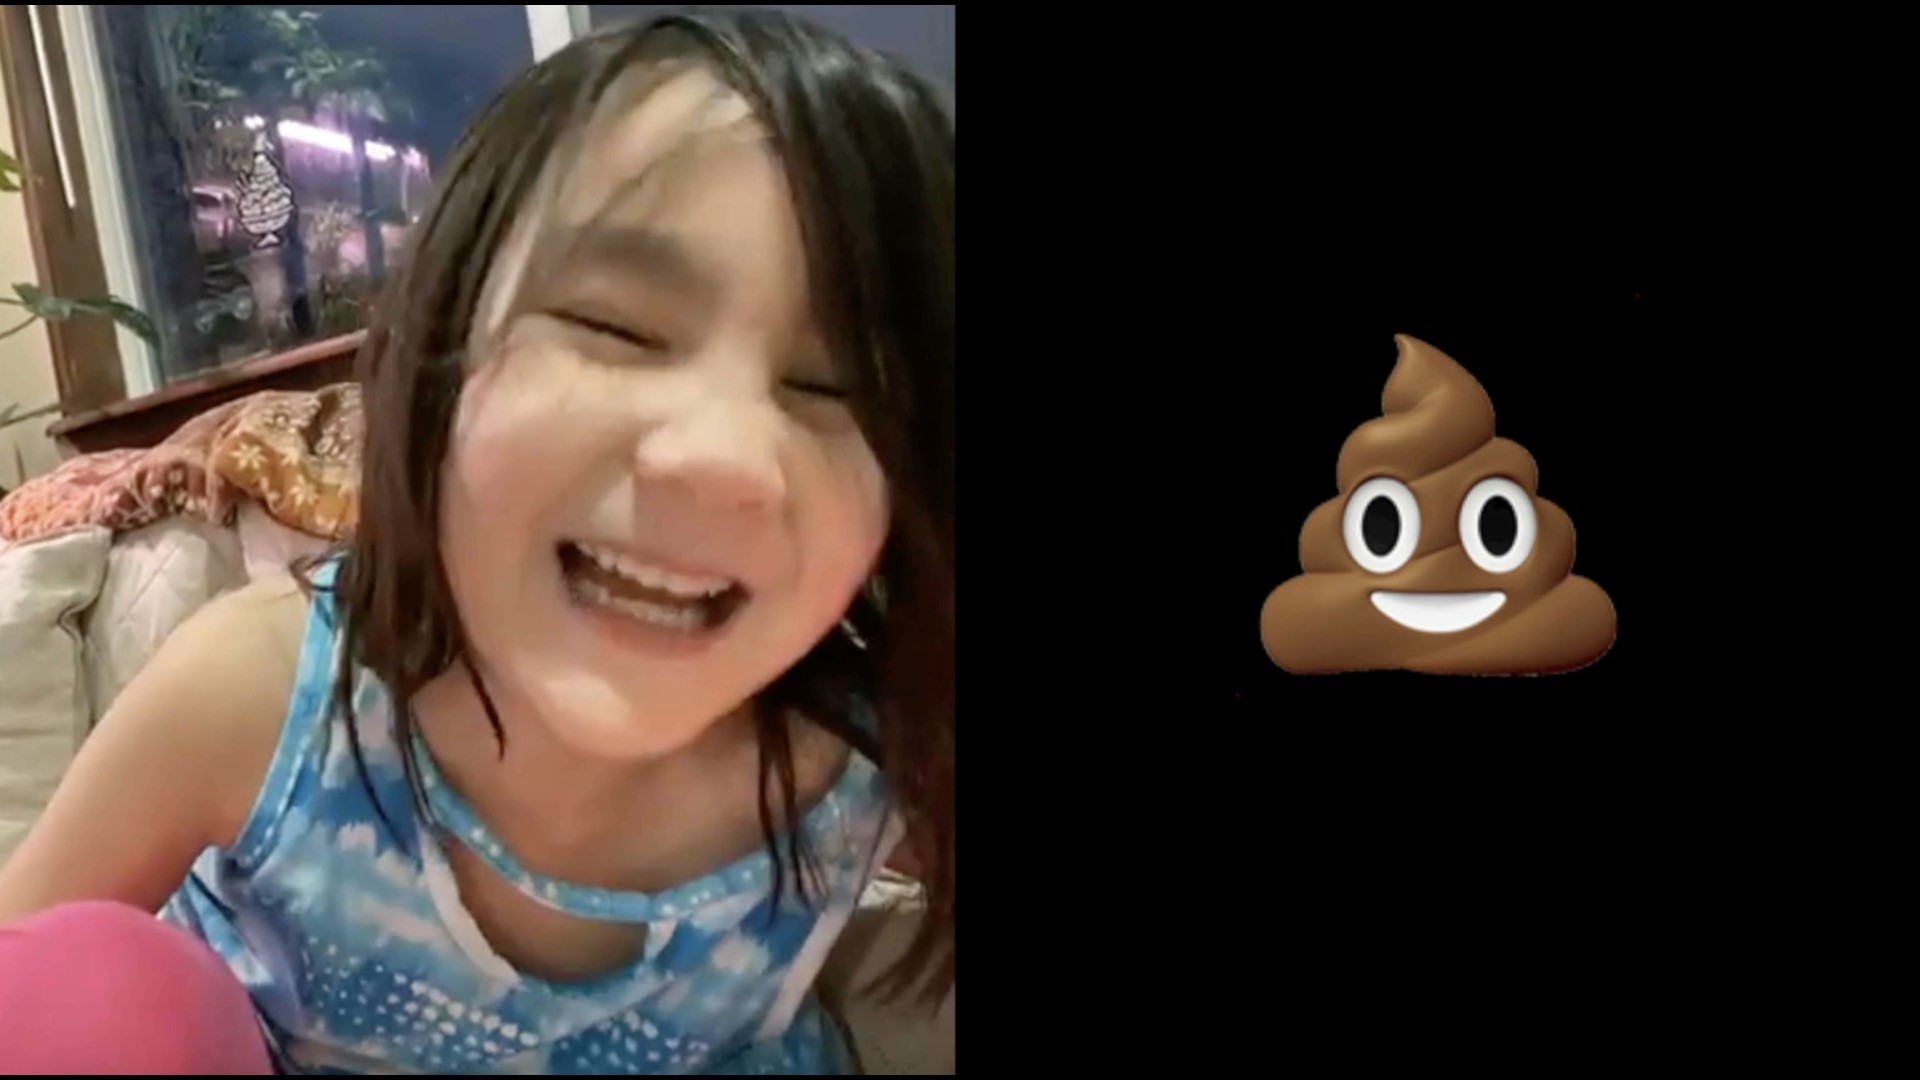 Local kids tell us what they think all those strange-looking emojis really mean. #k5evening